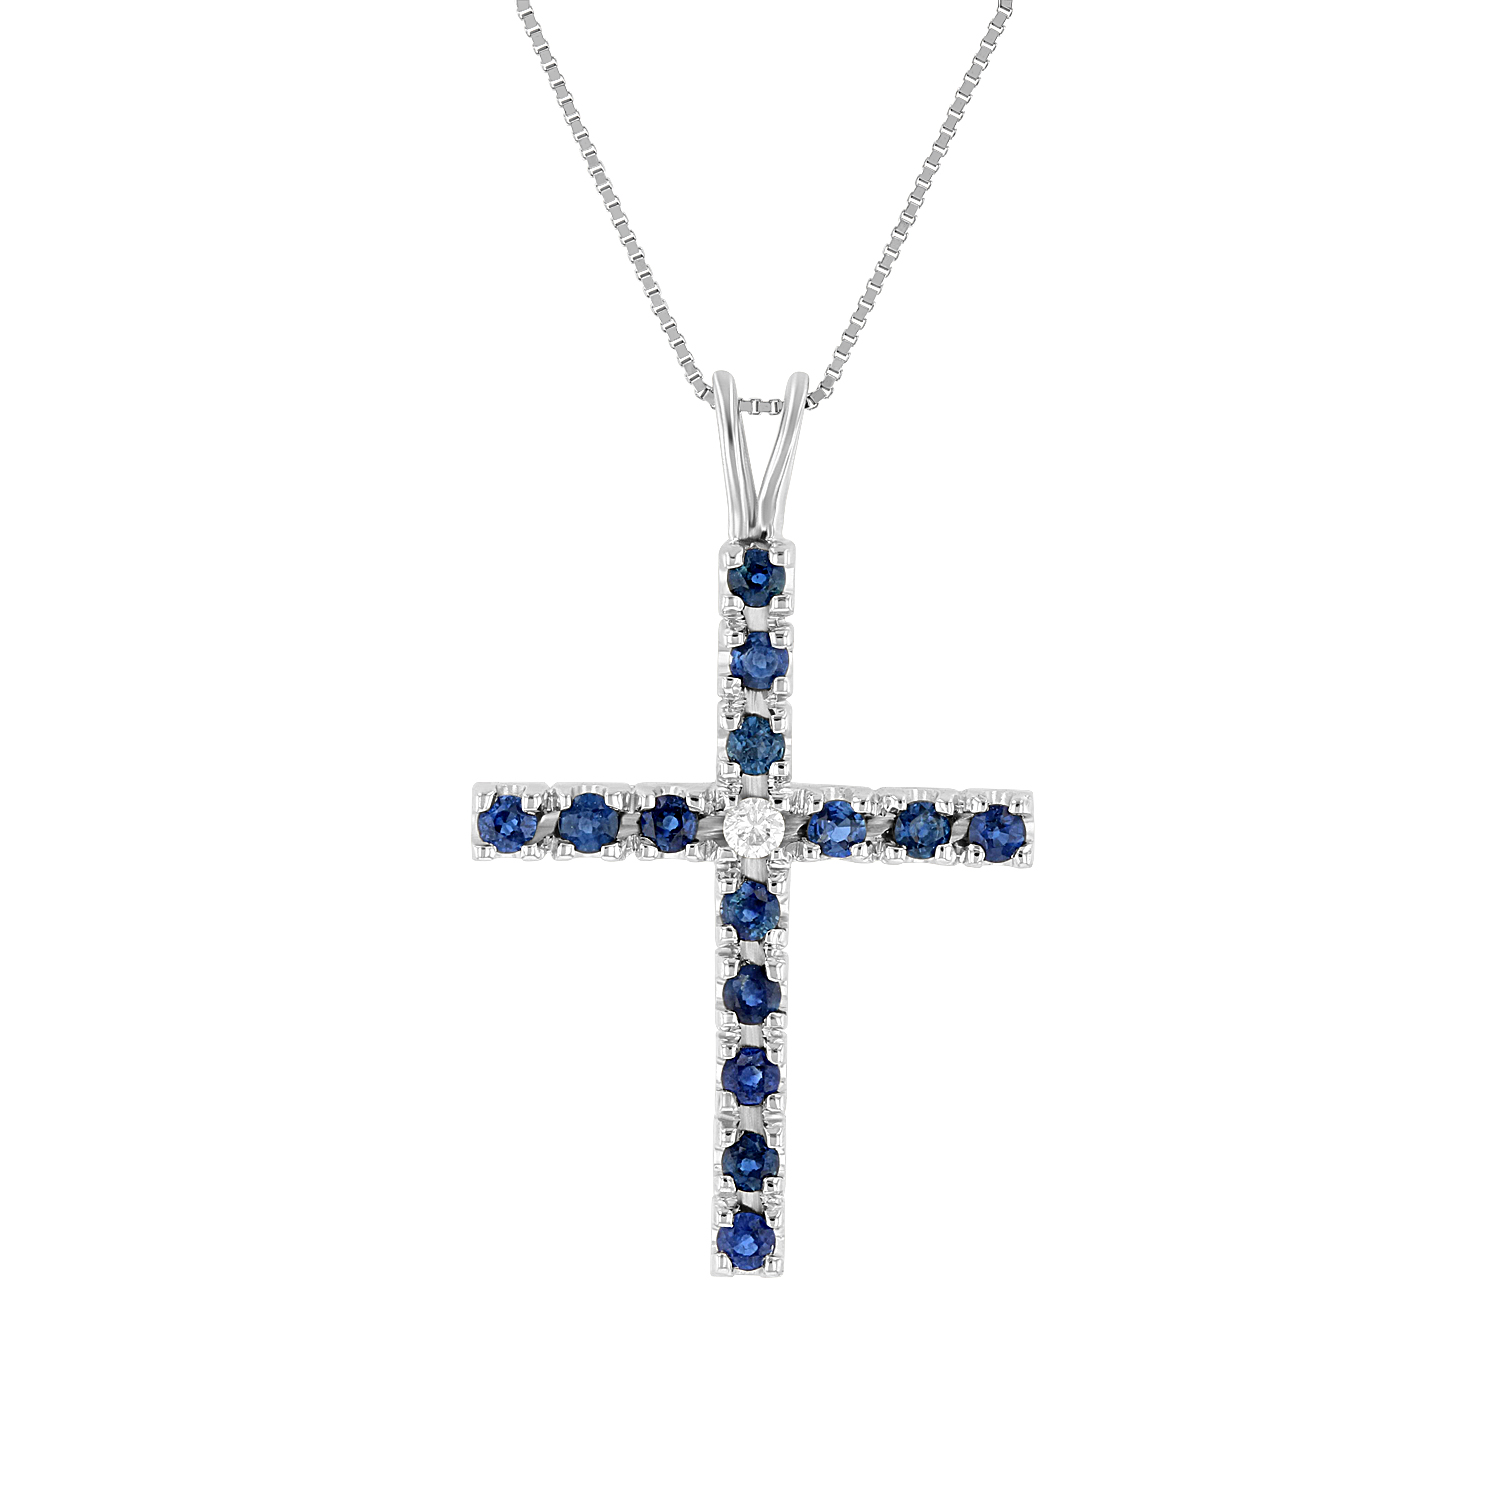 View 0.74ctw Diamond and Sapphire Cross Pendant in 14k White Gold